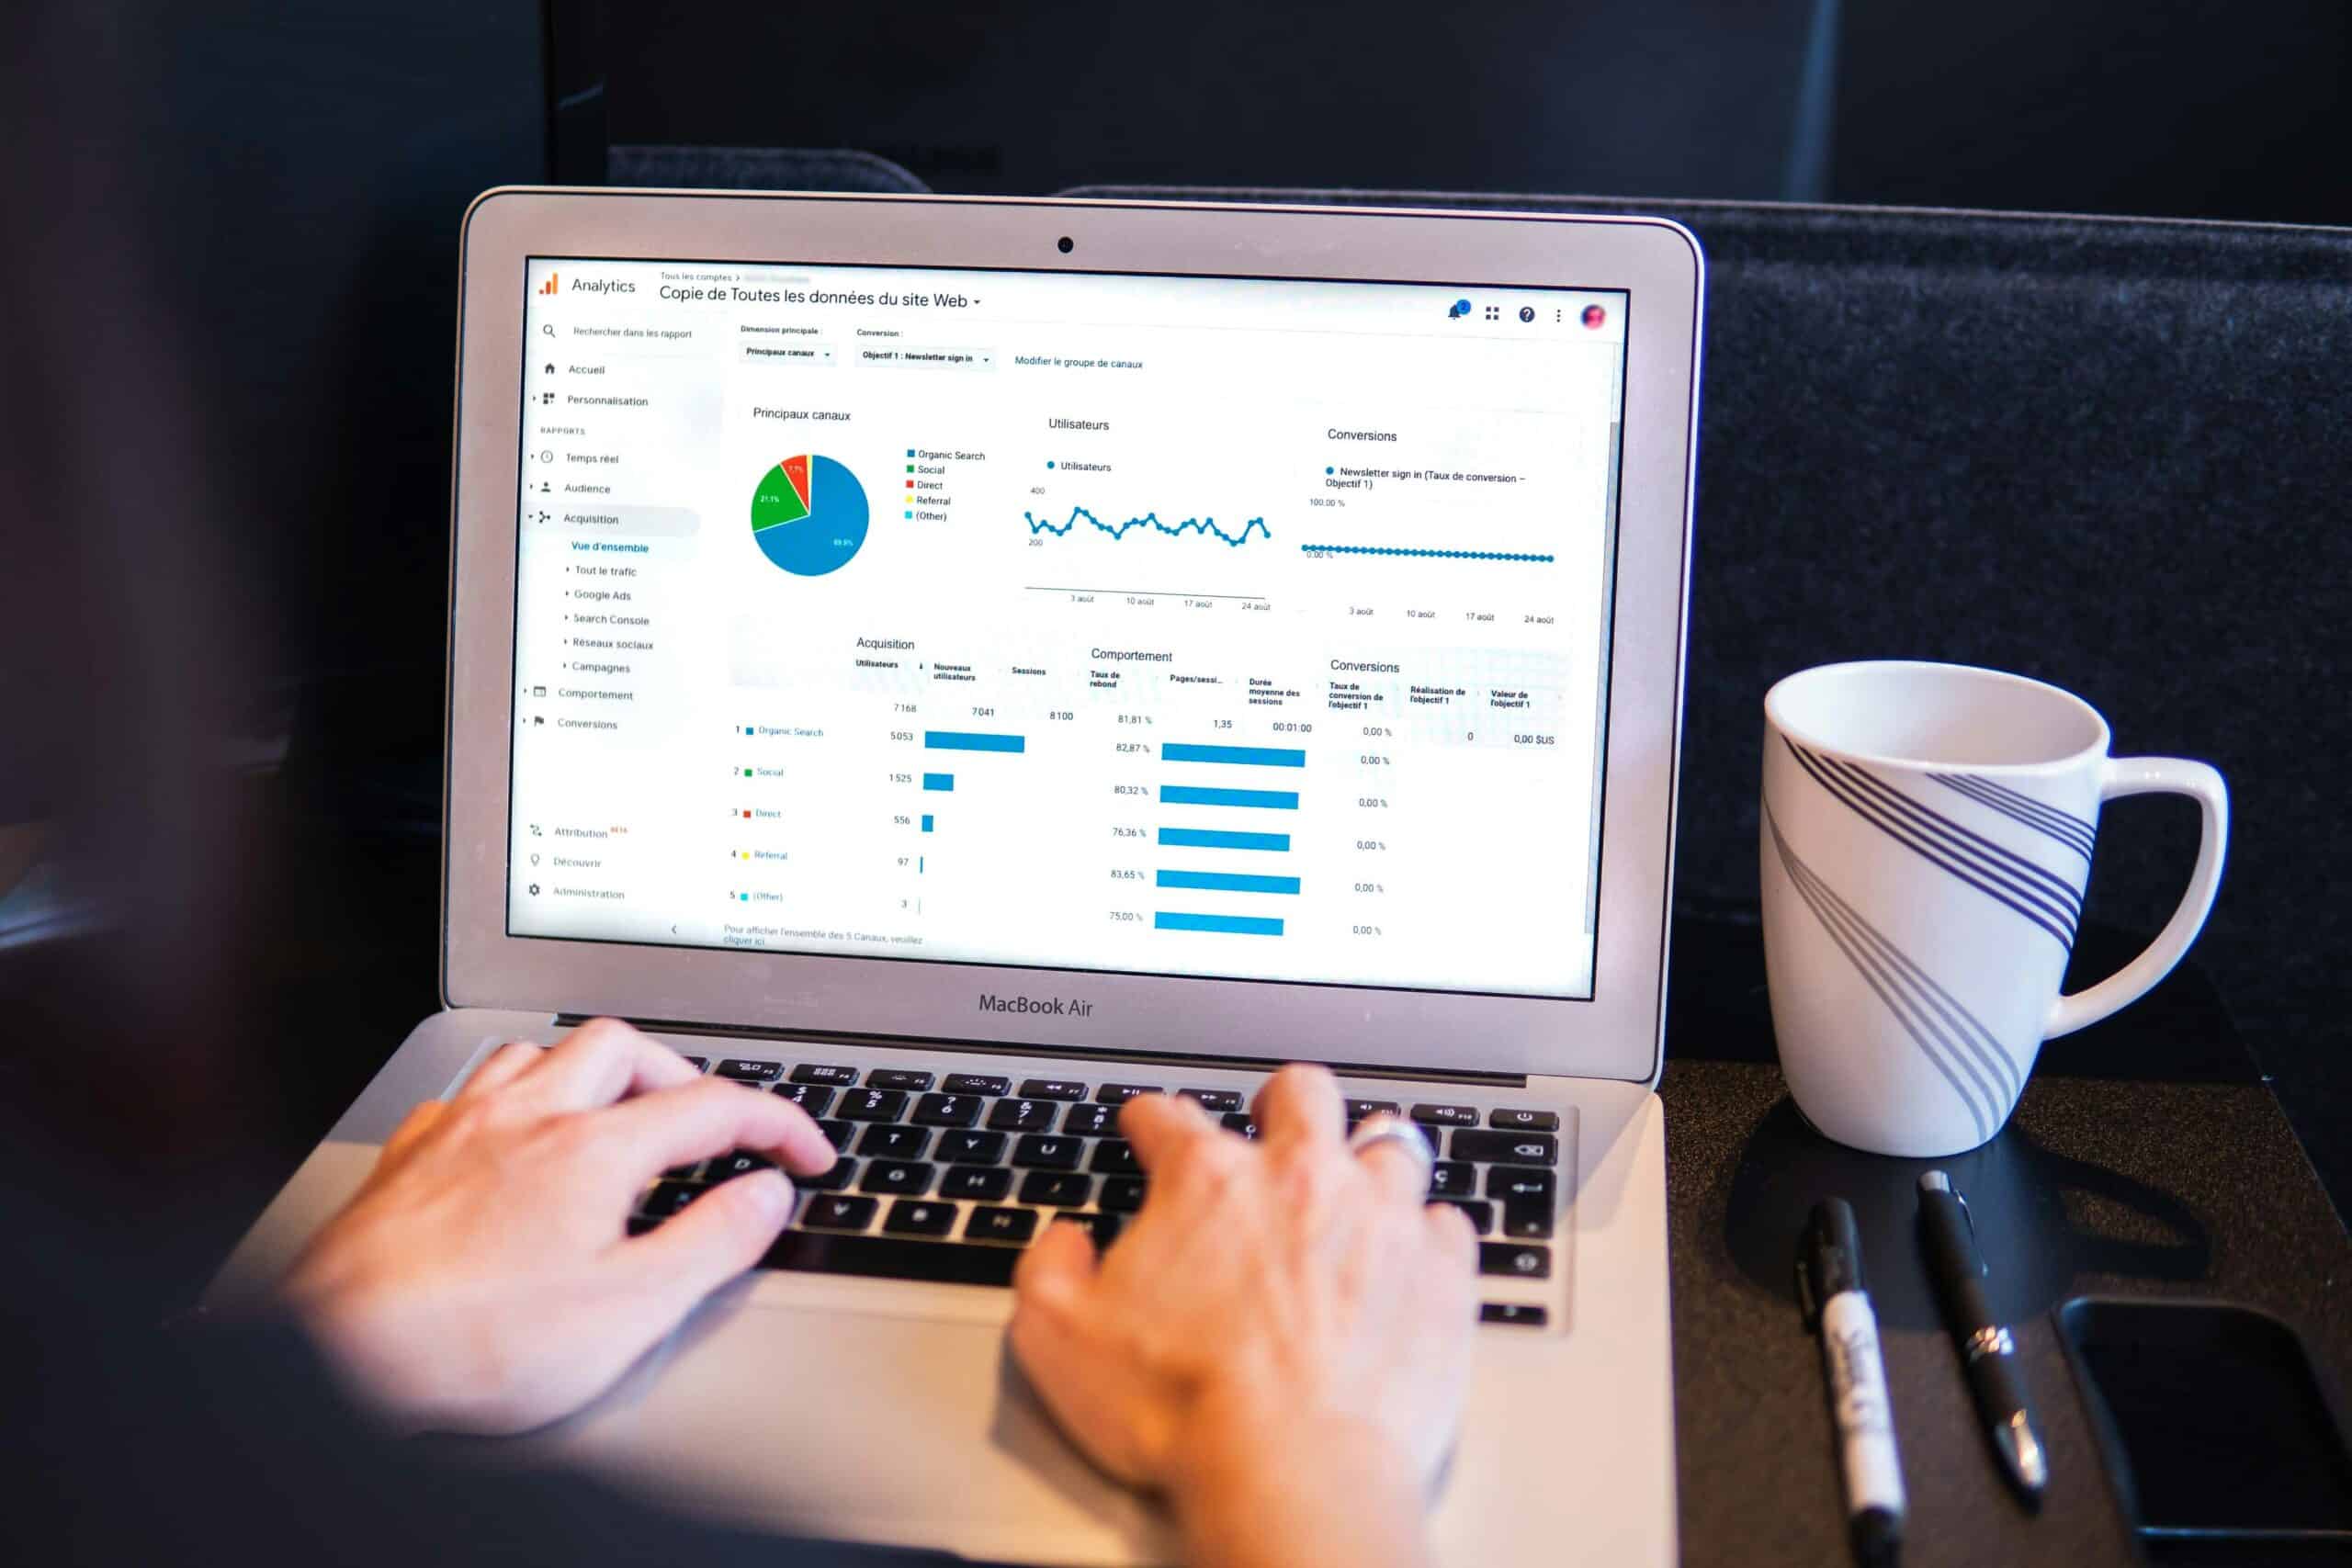 Image title: A data analyst uses a MacBook Pro on a black table. Image alt-title: event analytics Image URL: https://unsplash.com/photos/person-using-macbook-pro-on-black-table-eveI7MOcSmw 